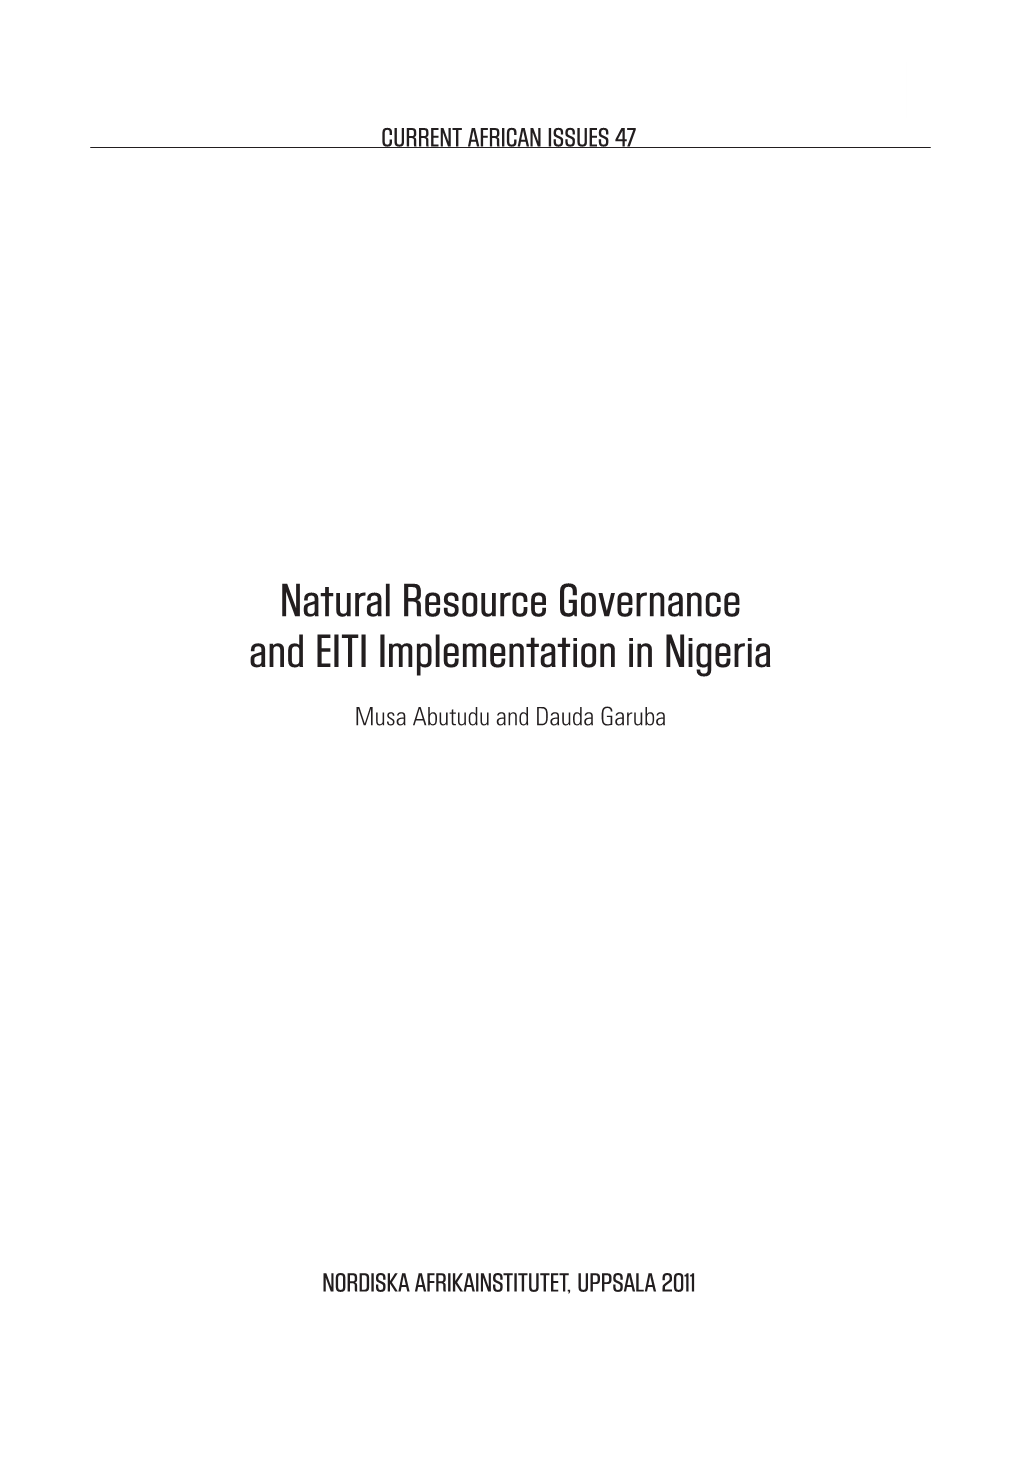 Natural Resource Governance and Eiti Implementation in Nigeria Current African Issues 47